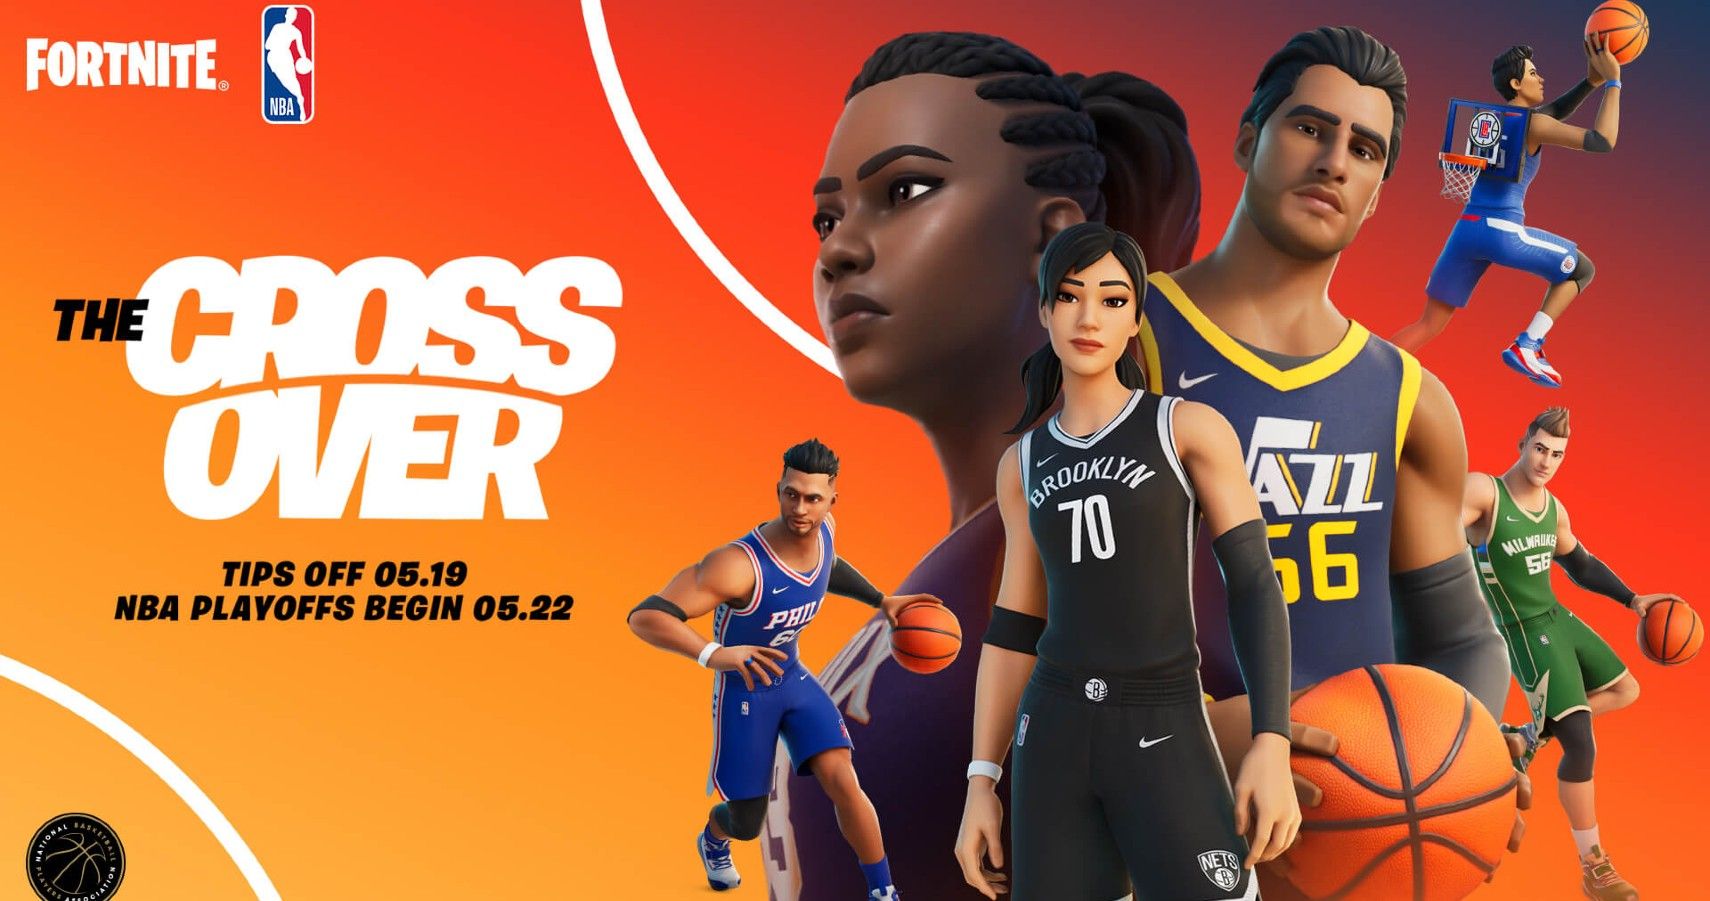 Fortnite x NBA The Crossover Brings All 30 Uniforms To The Game, But